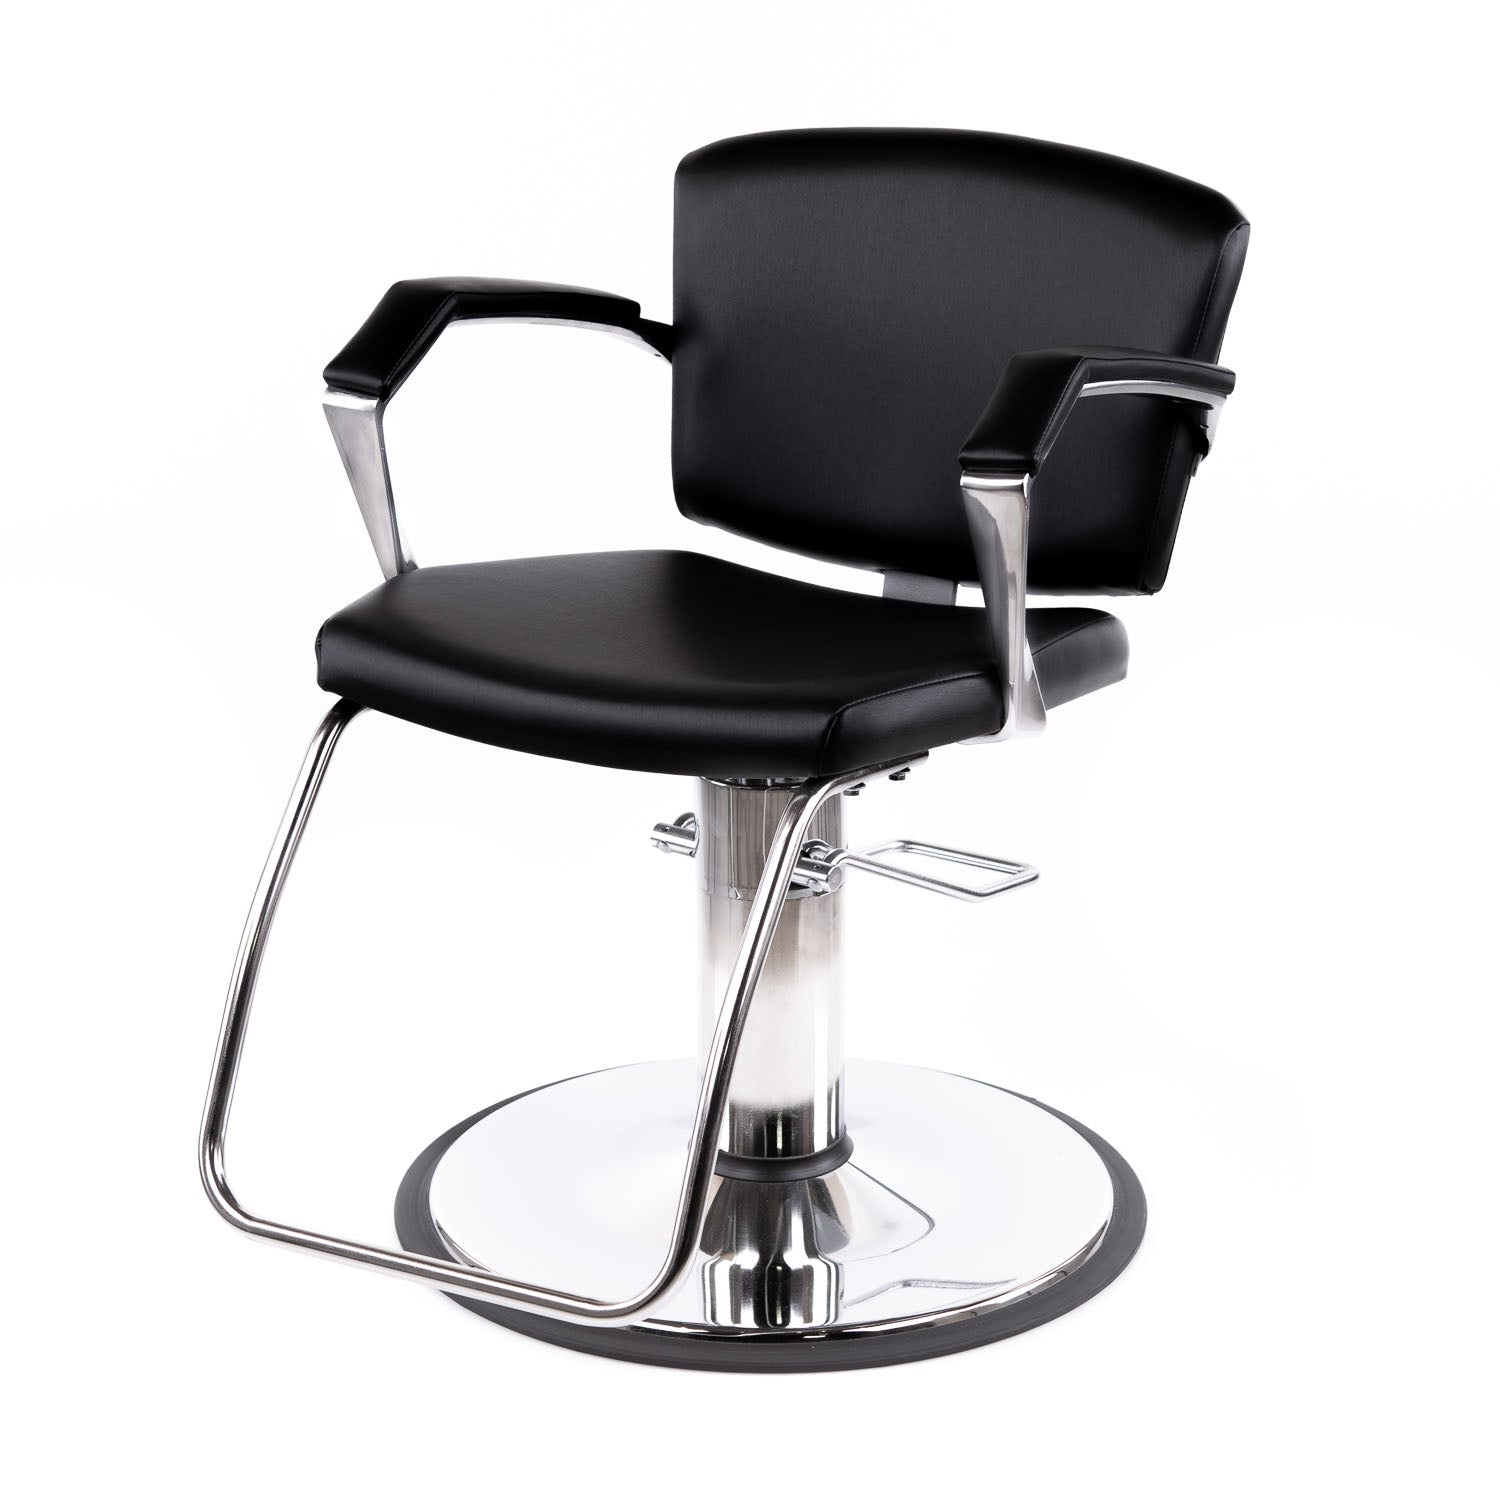 Adarna Styling Chair - Collins